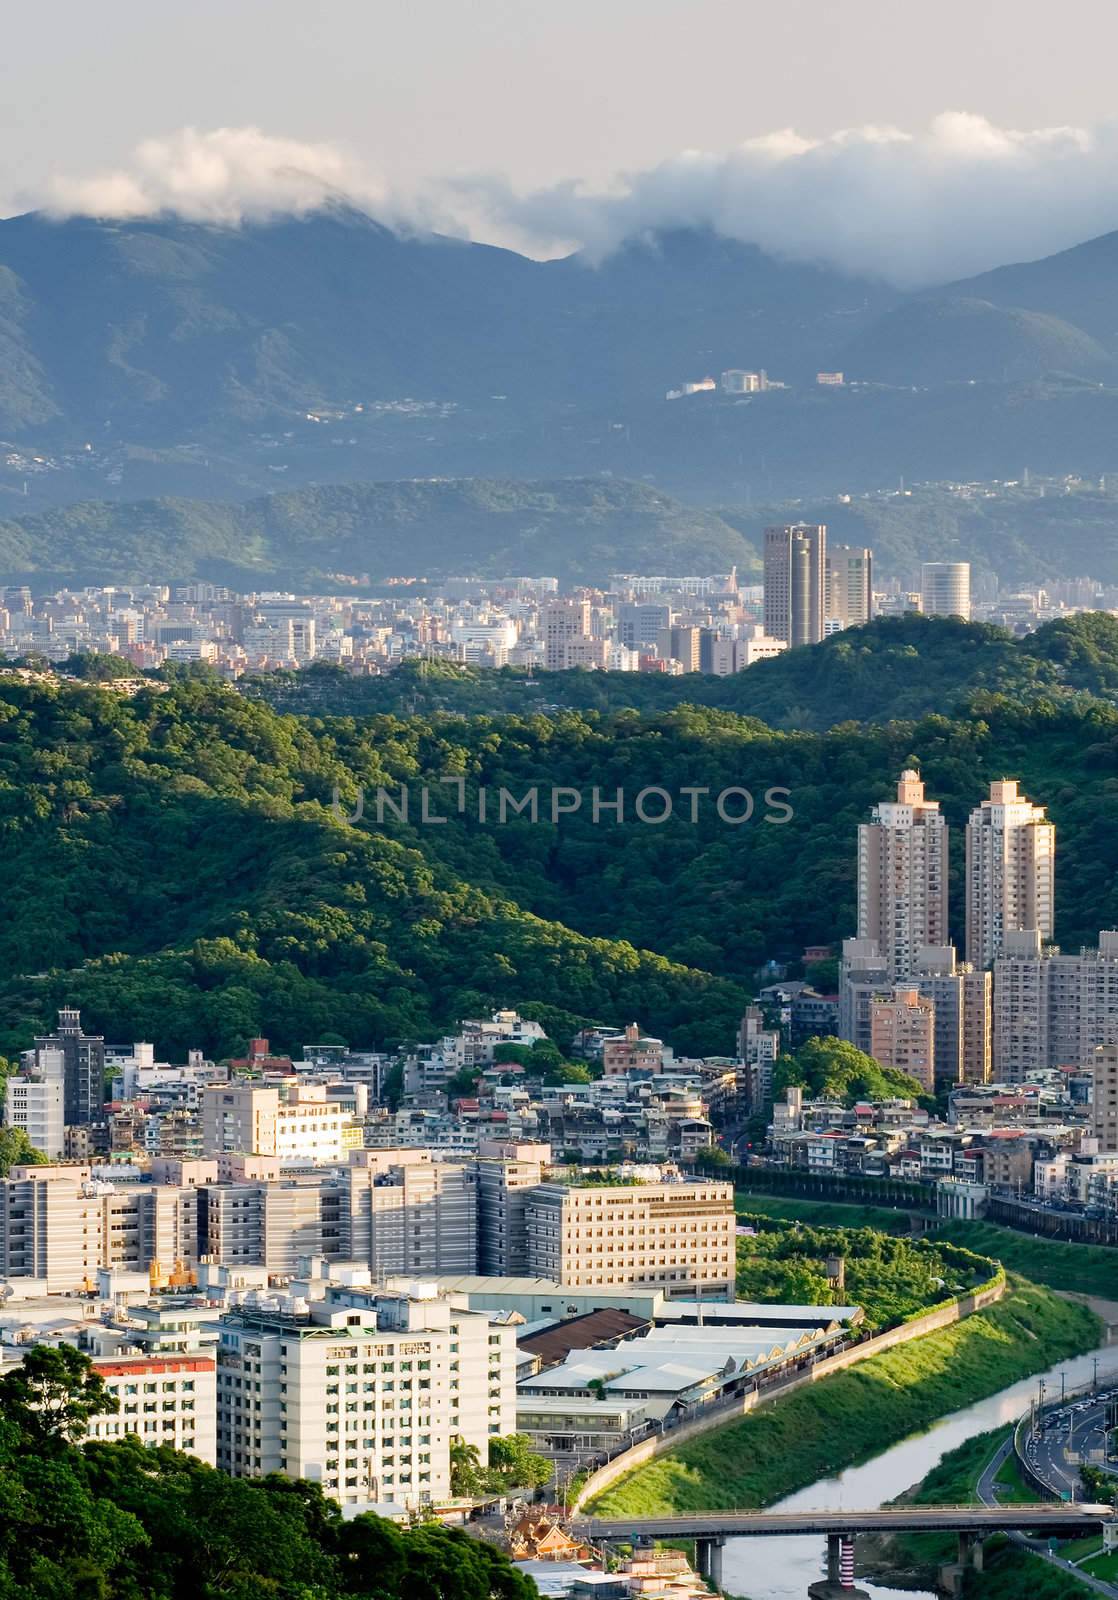 It is a beautiful city landscape in Asian city of Taiwan.